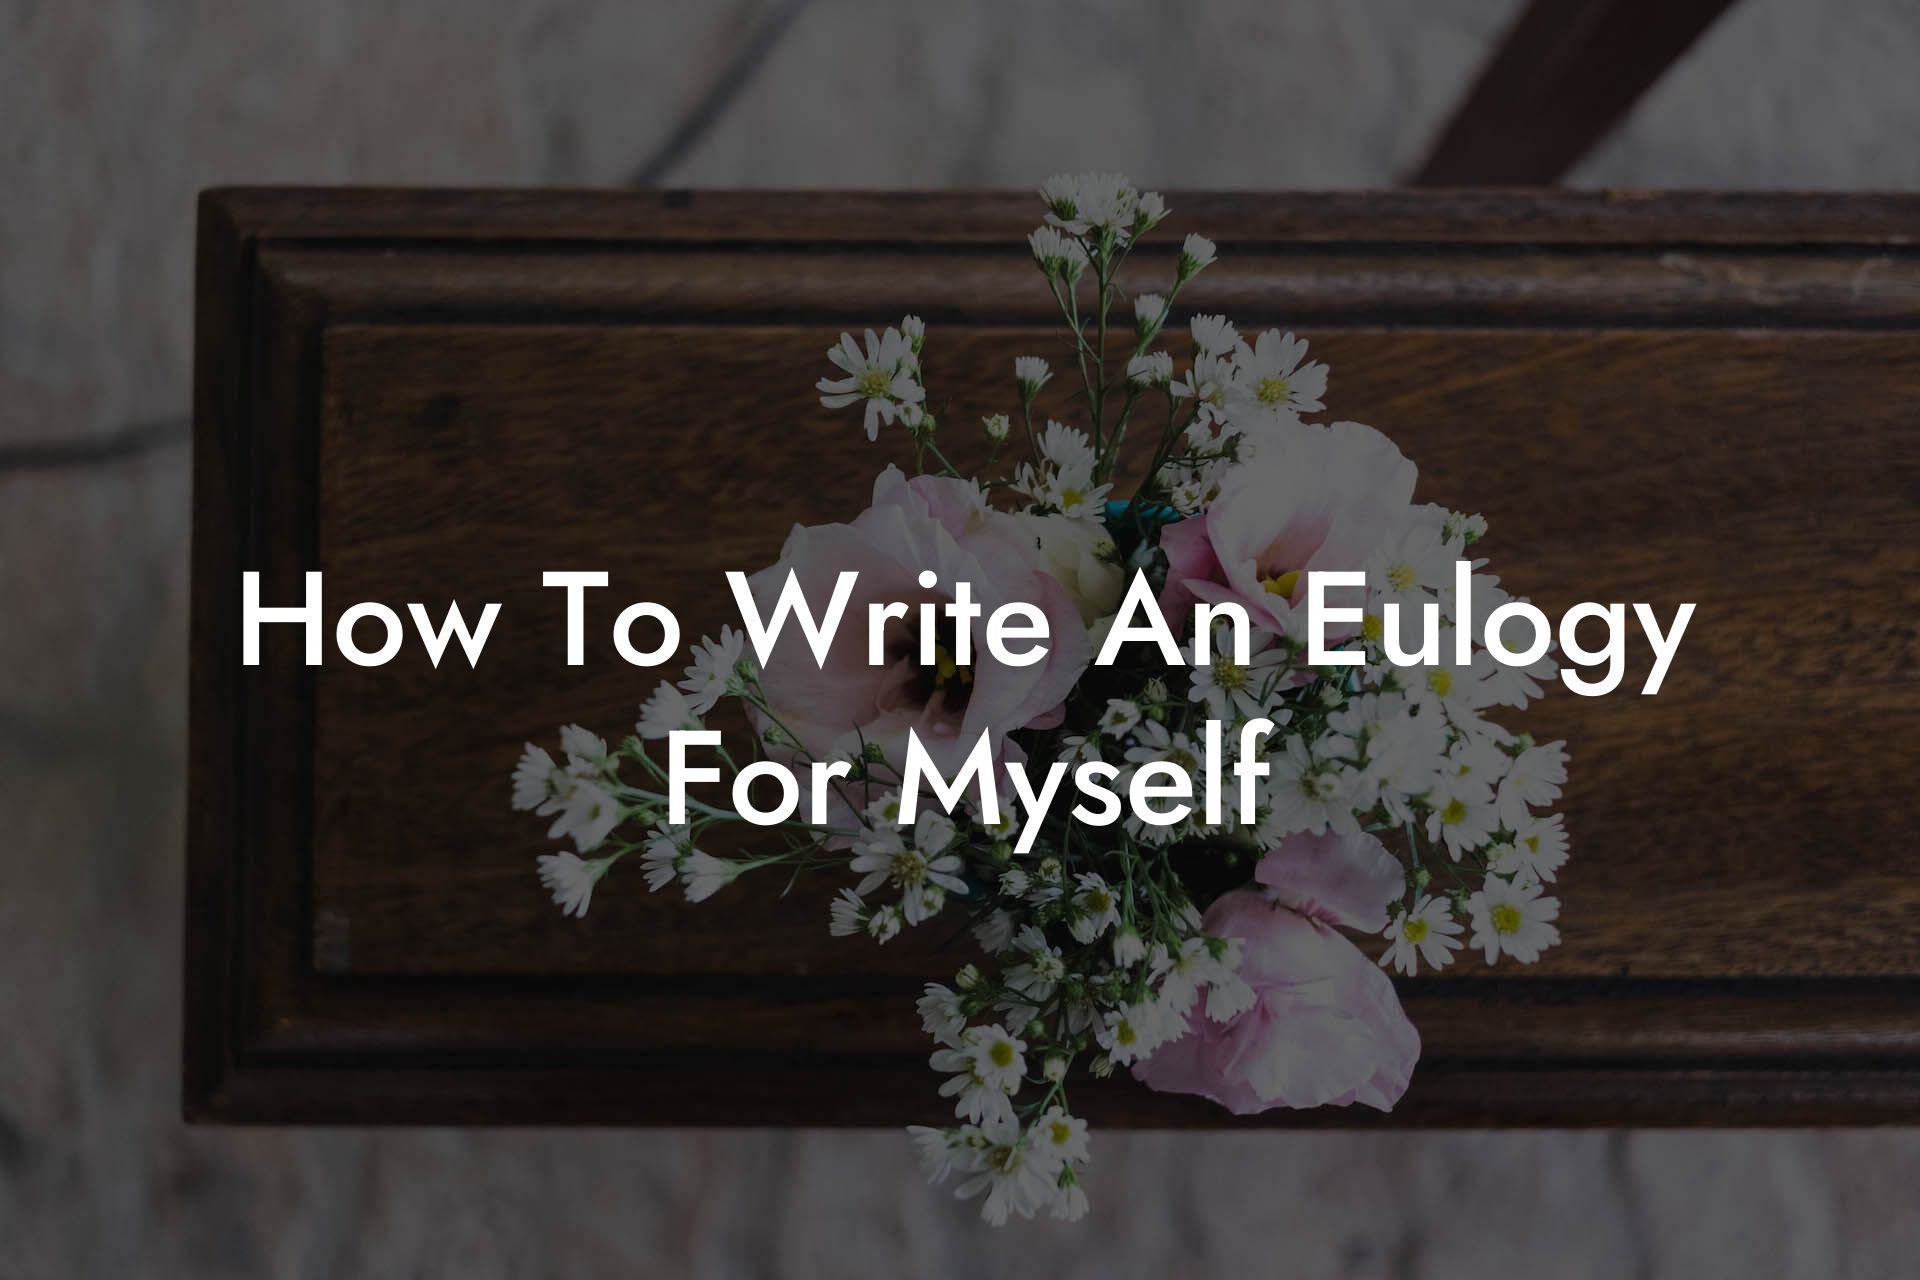 How To Write An Eulogy For Myself